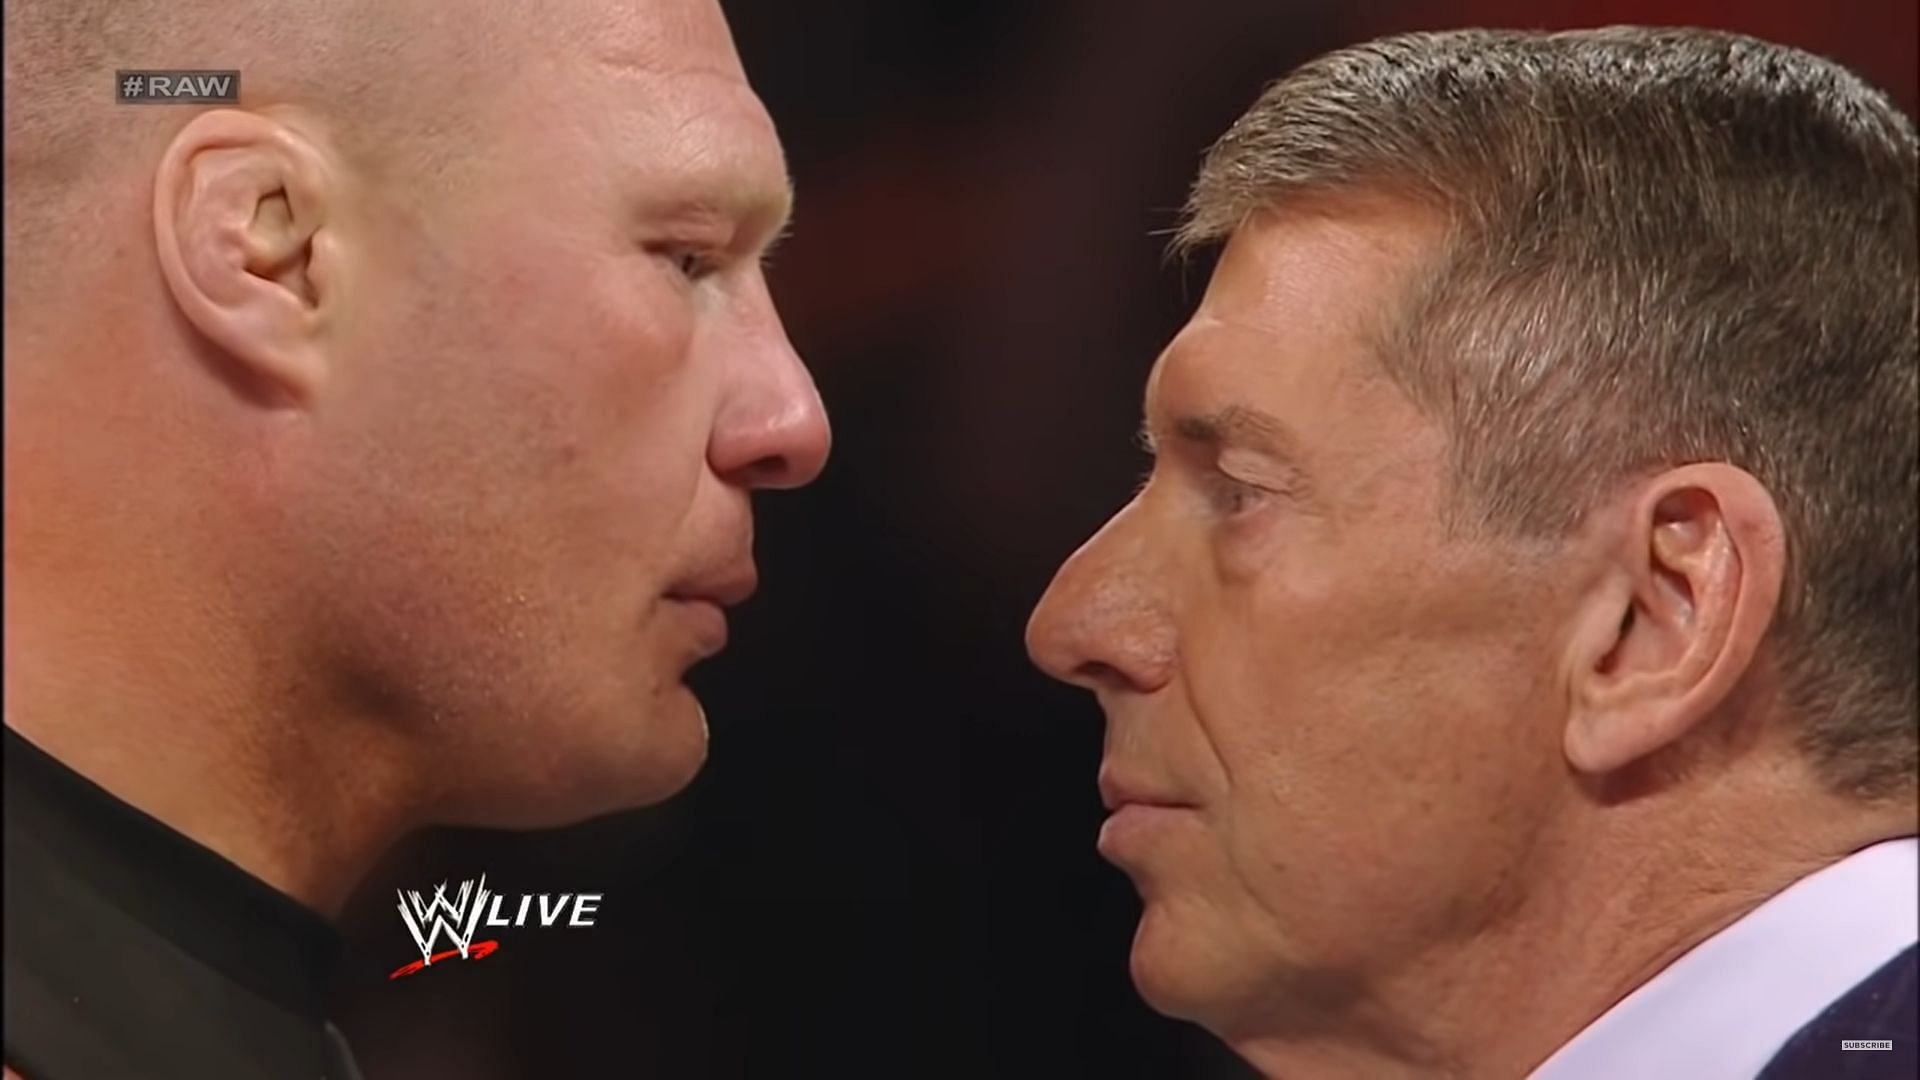 Brock Lesnar and Vince McMahon face to face in 2013